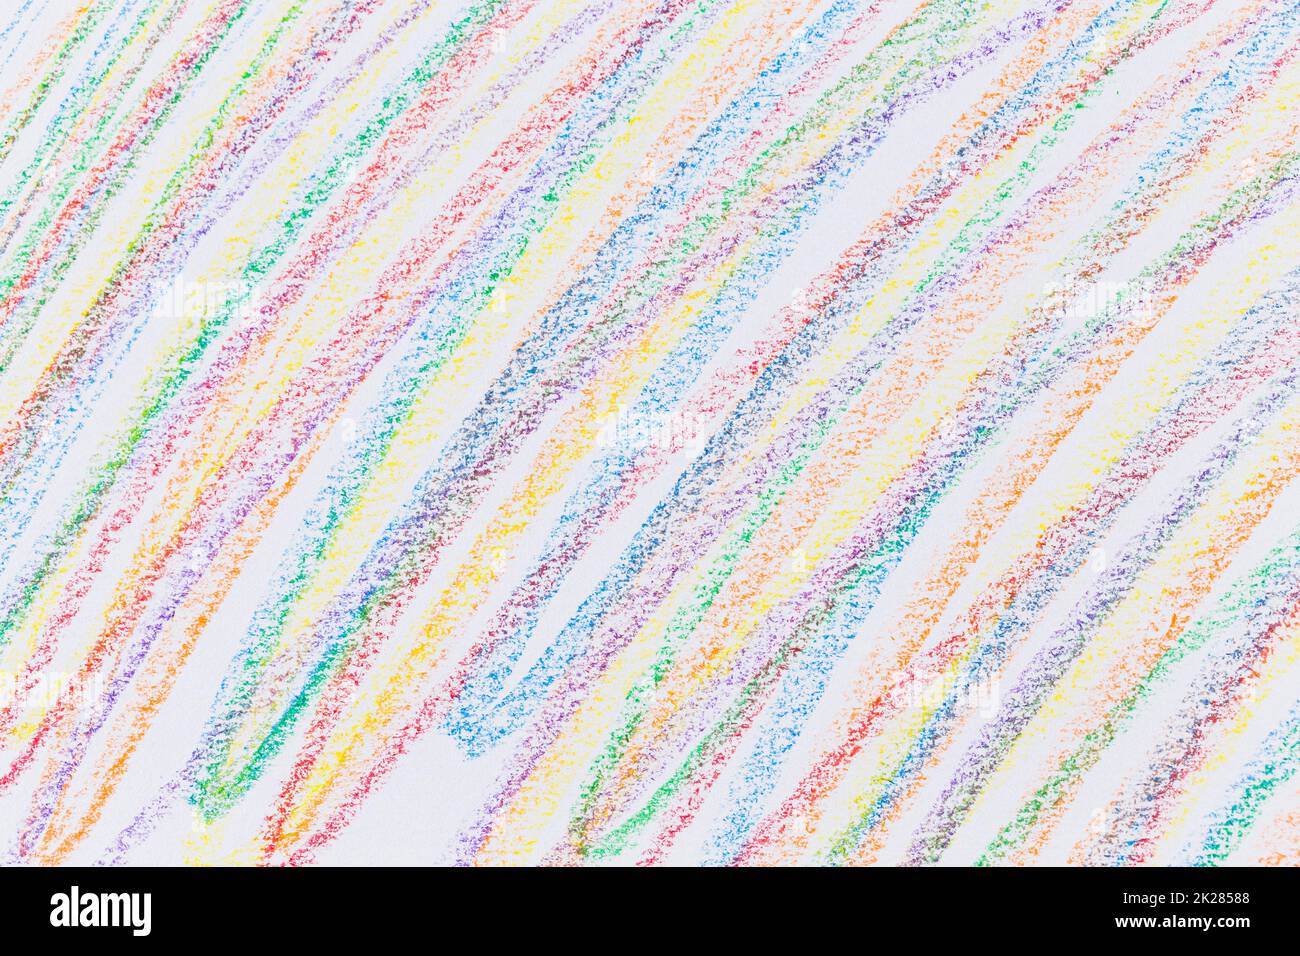 Multi color hand crayon drawing Stock Photo